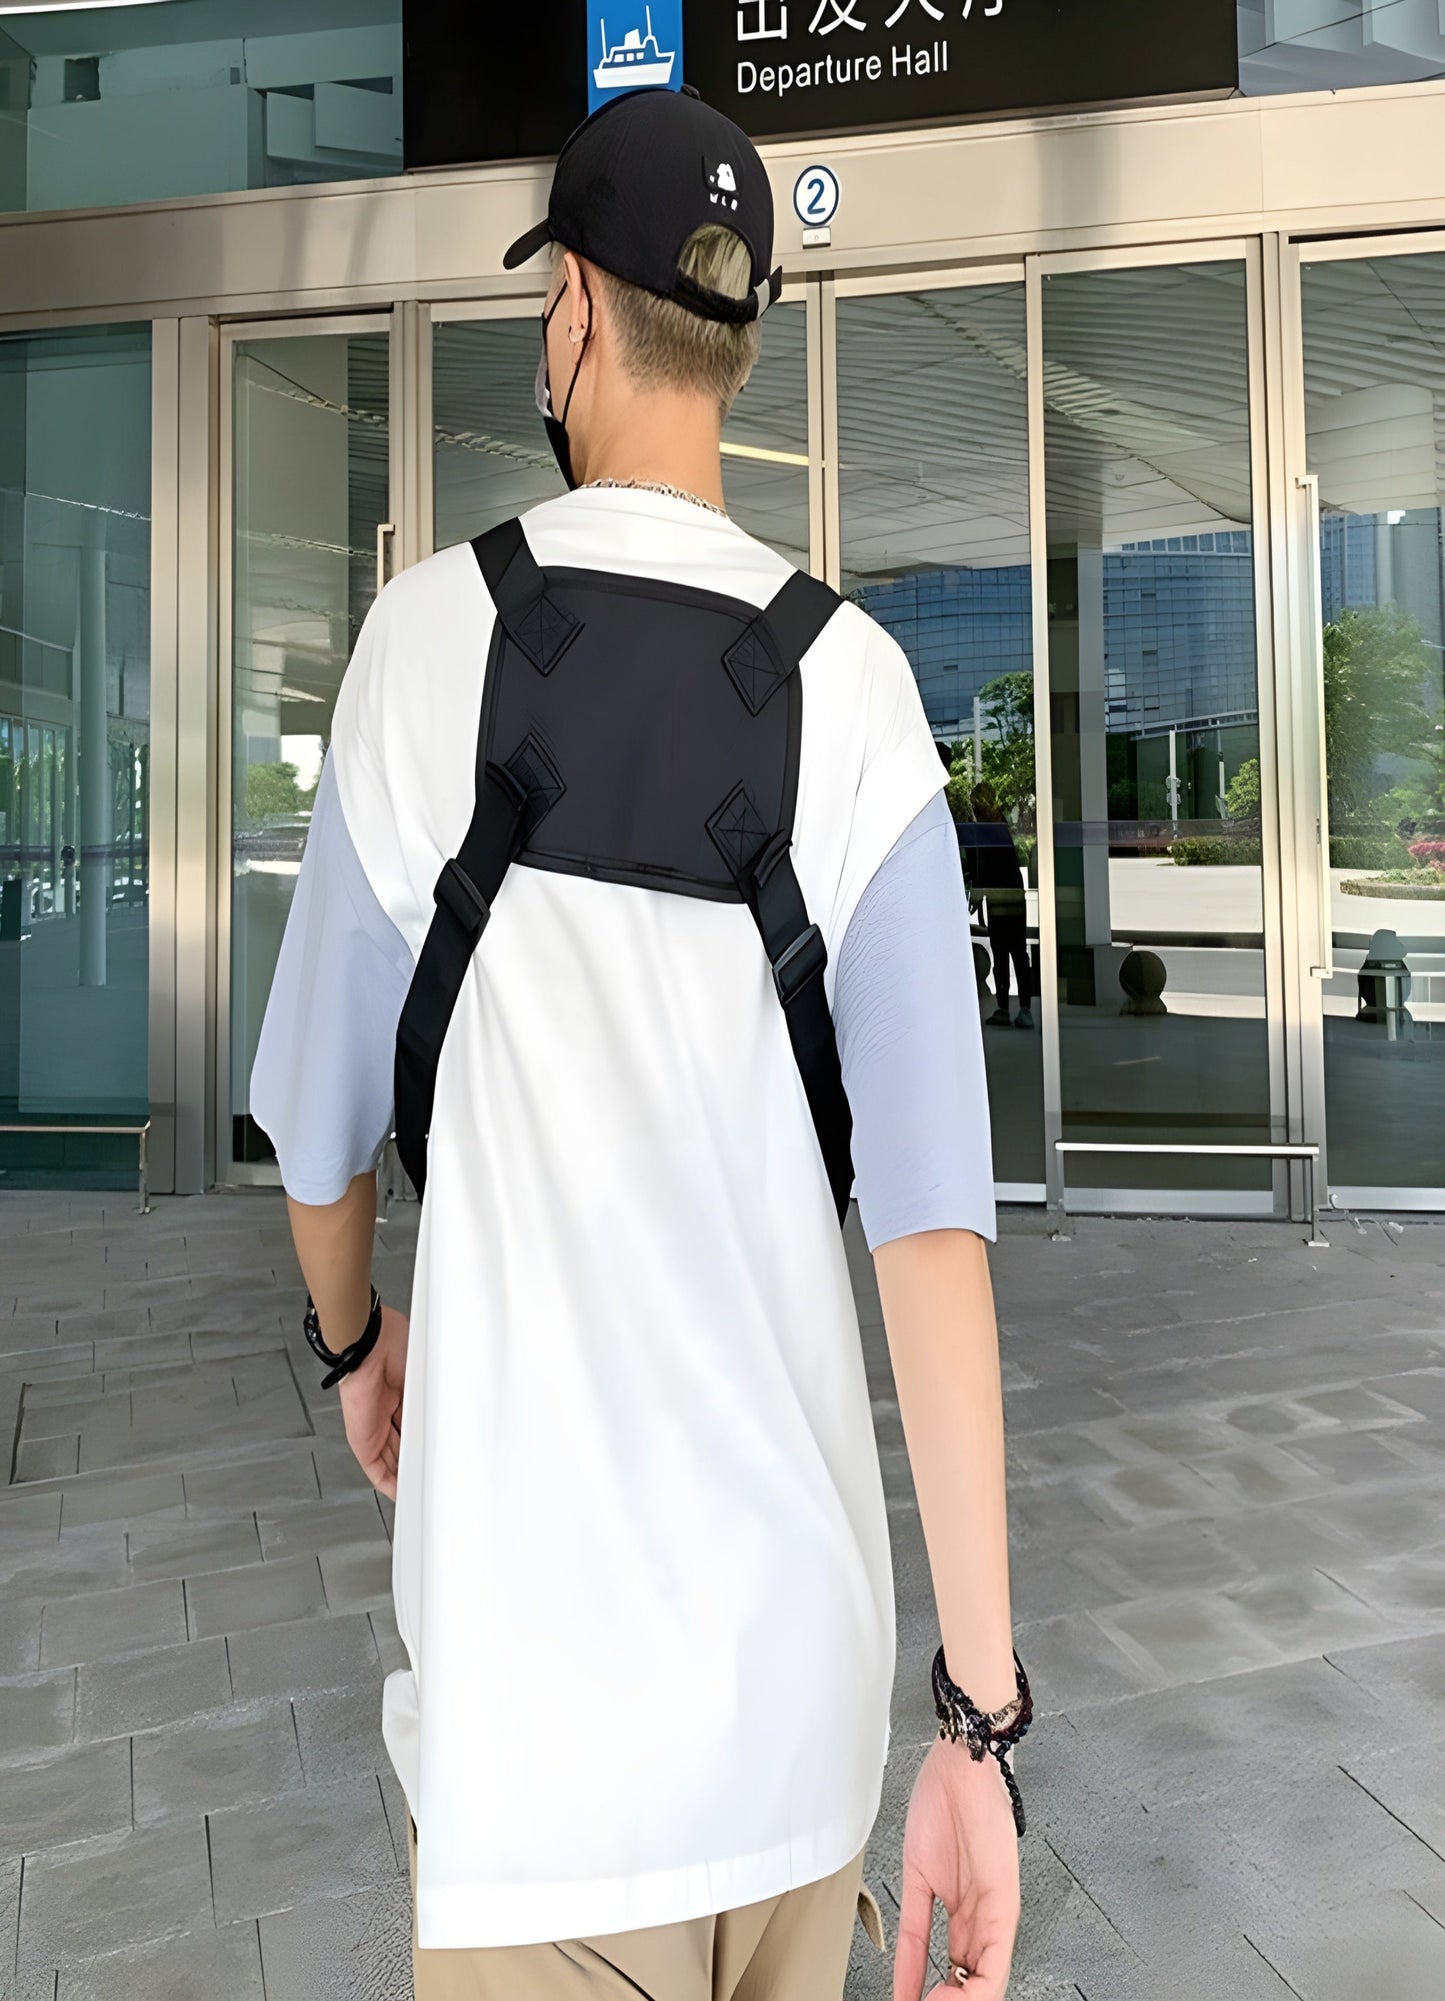 A back view of a male model showcasing a chest utility bag, highlighting its ergonomic design with multiple compartments and adjustable straps for versatile use, emphasizing both functionality and fashion.